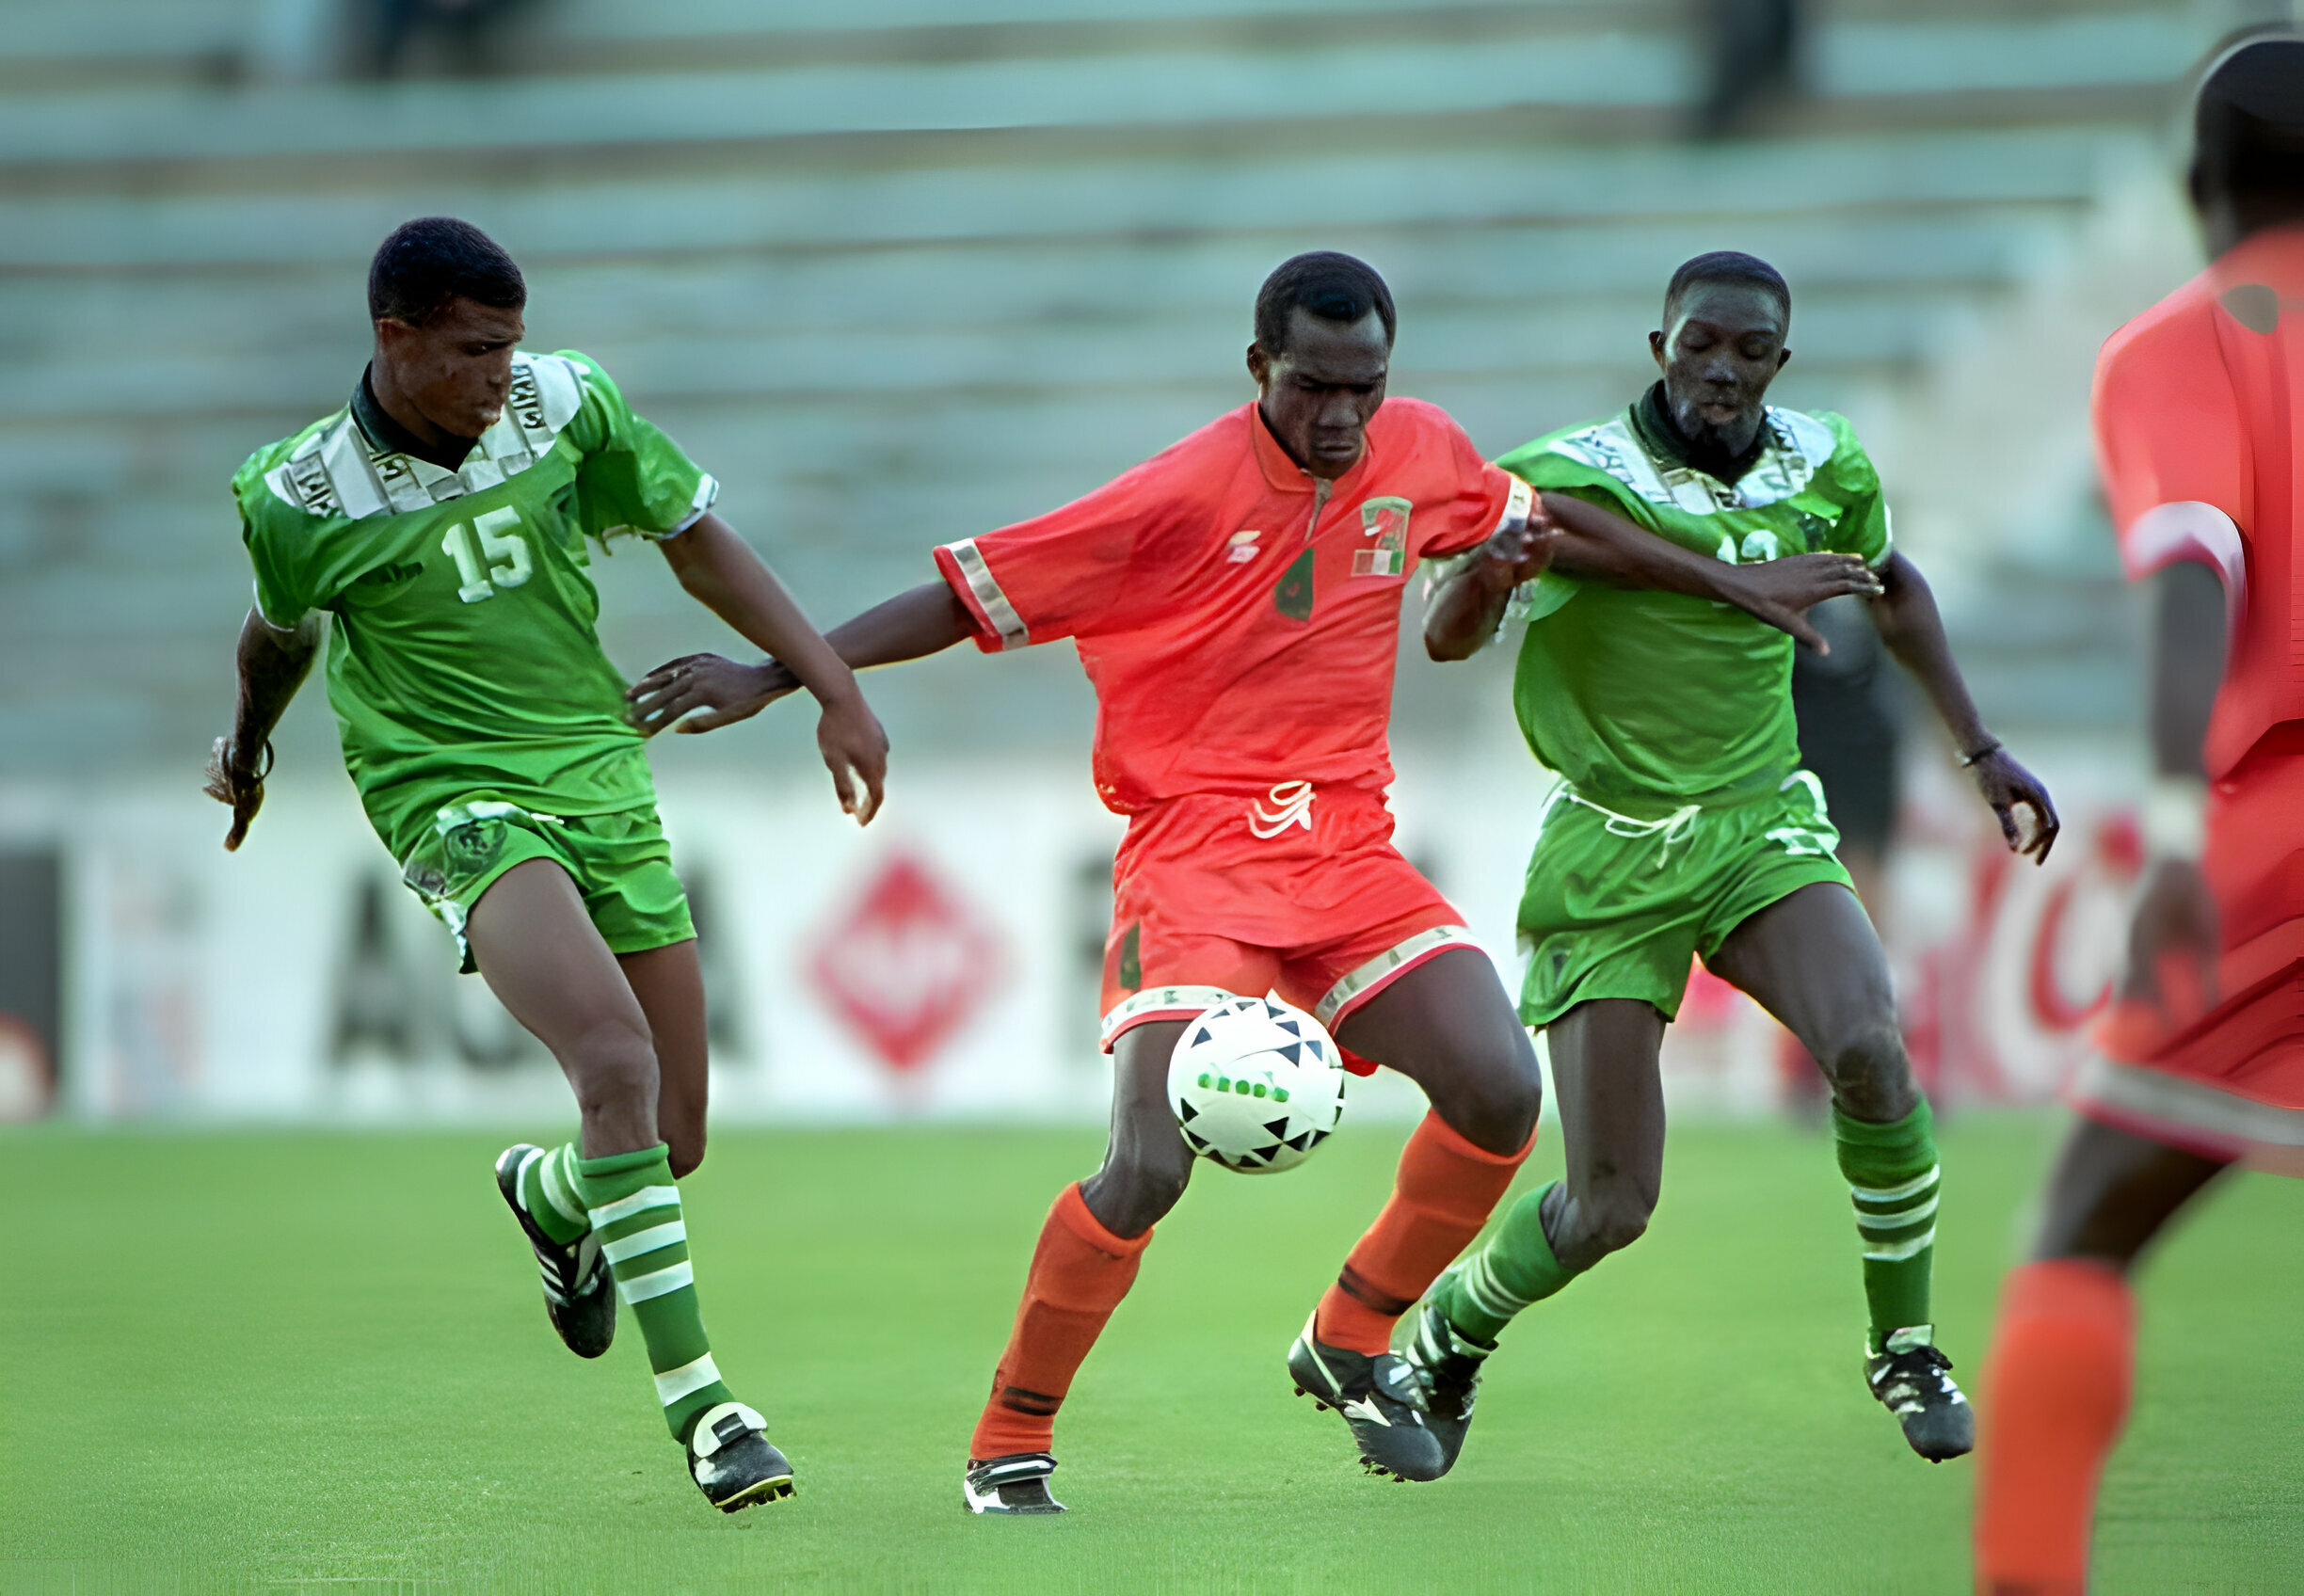 5 interesting facts about Nigeria vs Ivory Coast AFCON clash | Guardian Nigeria News